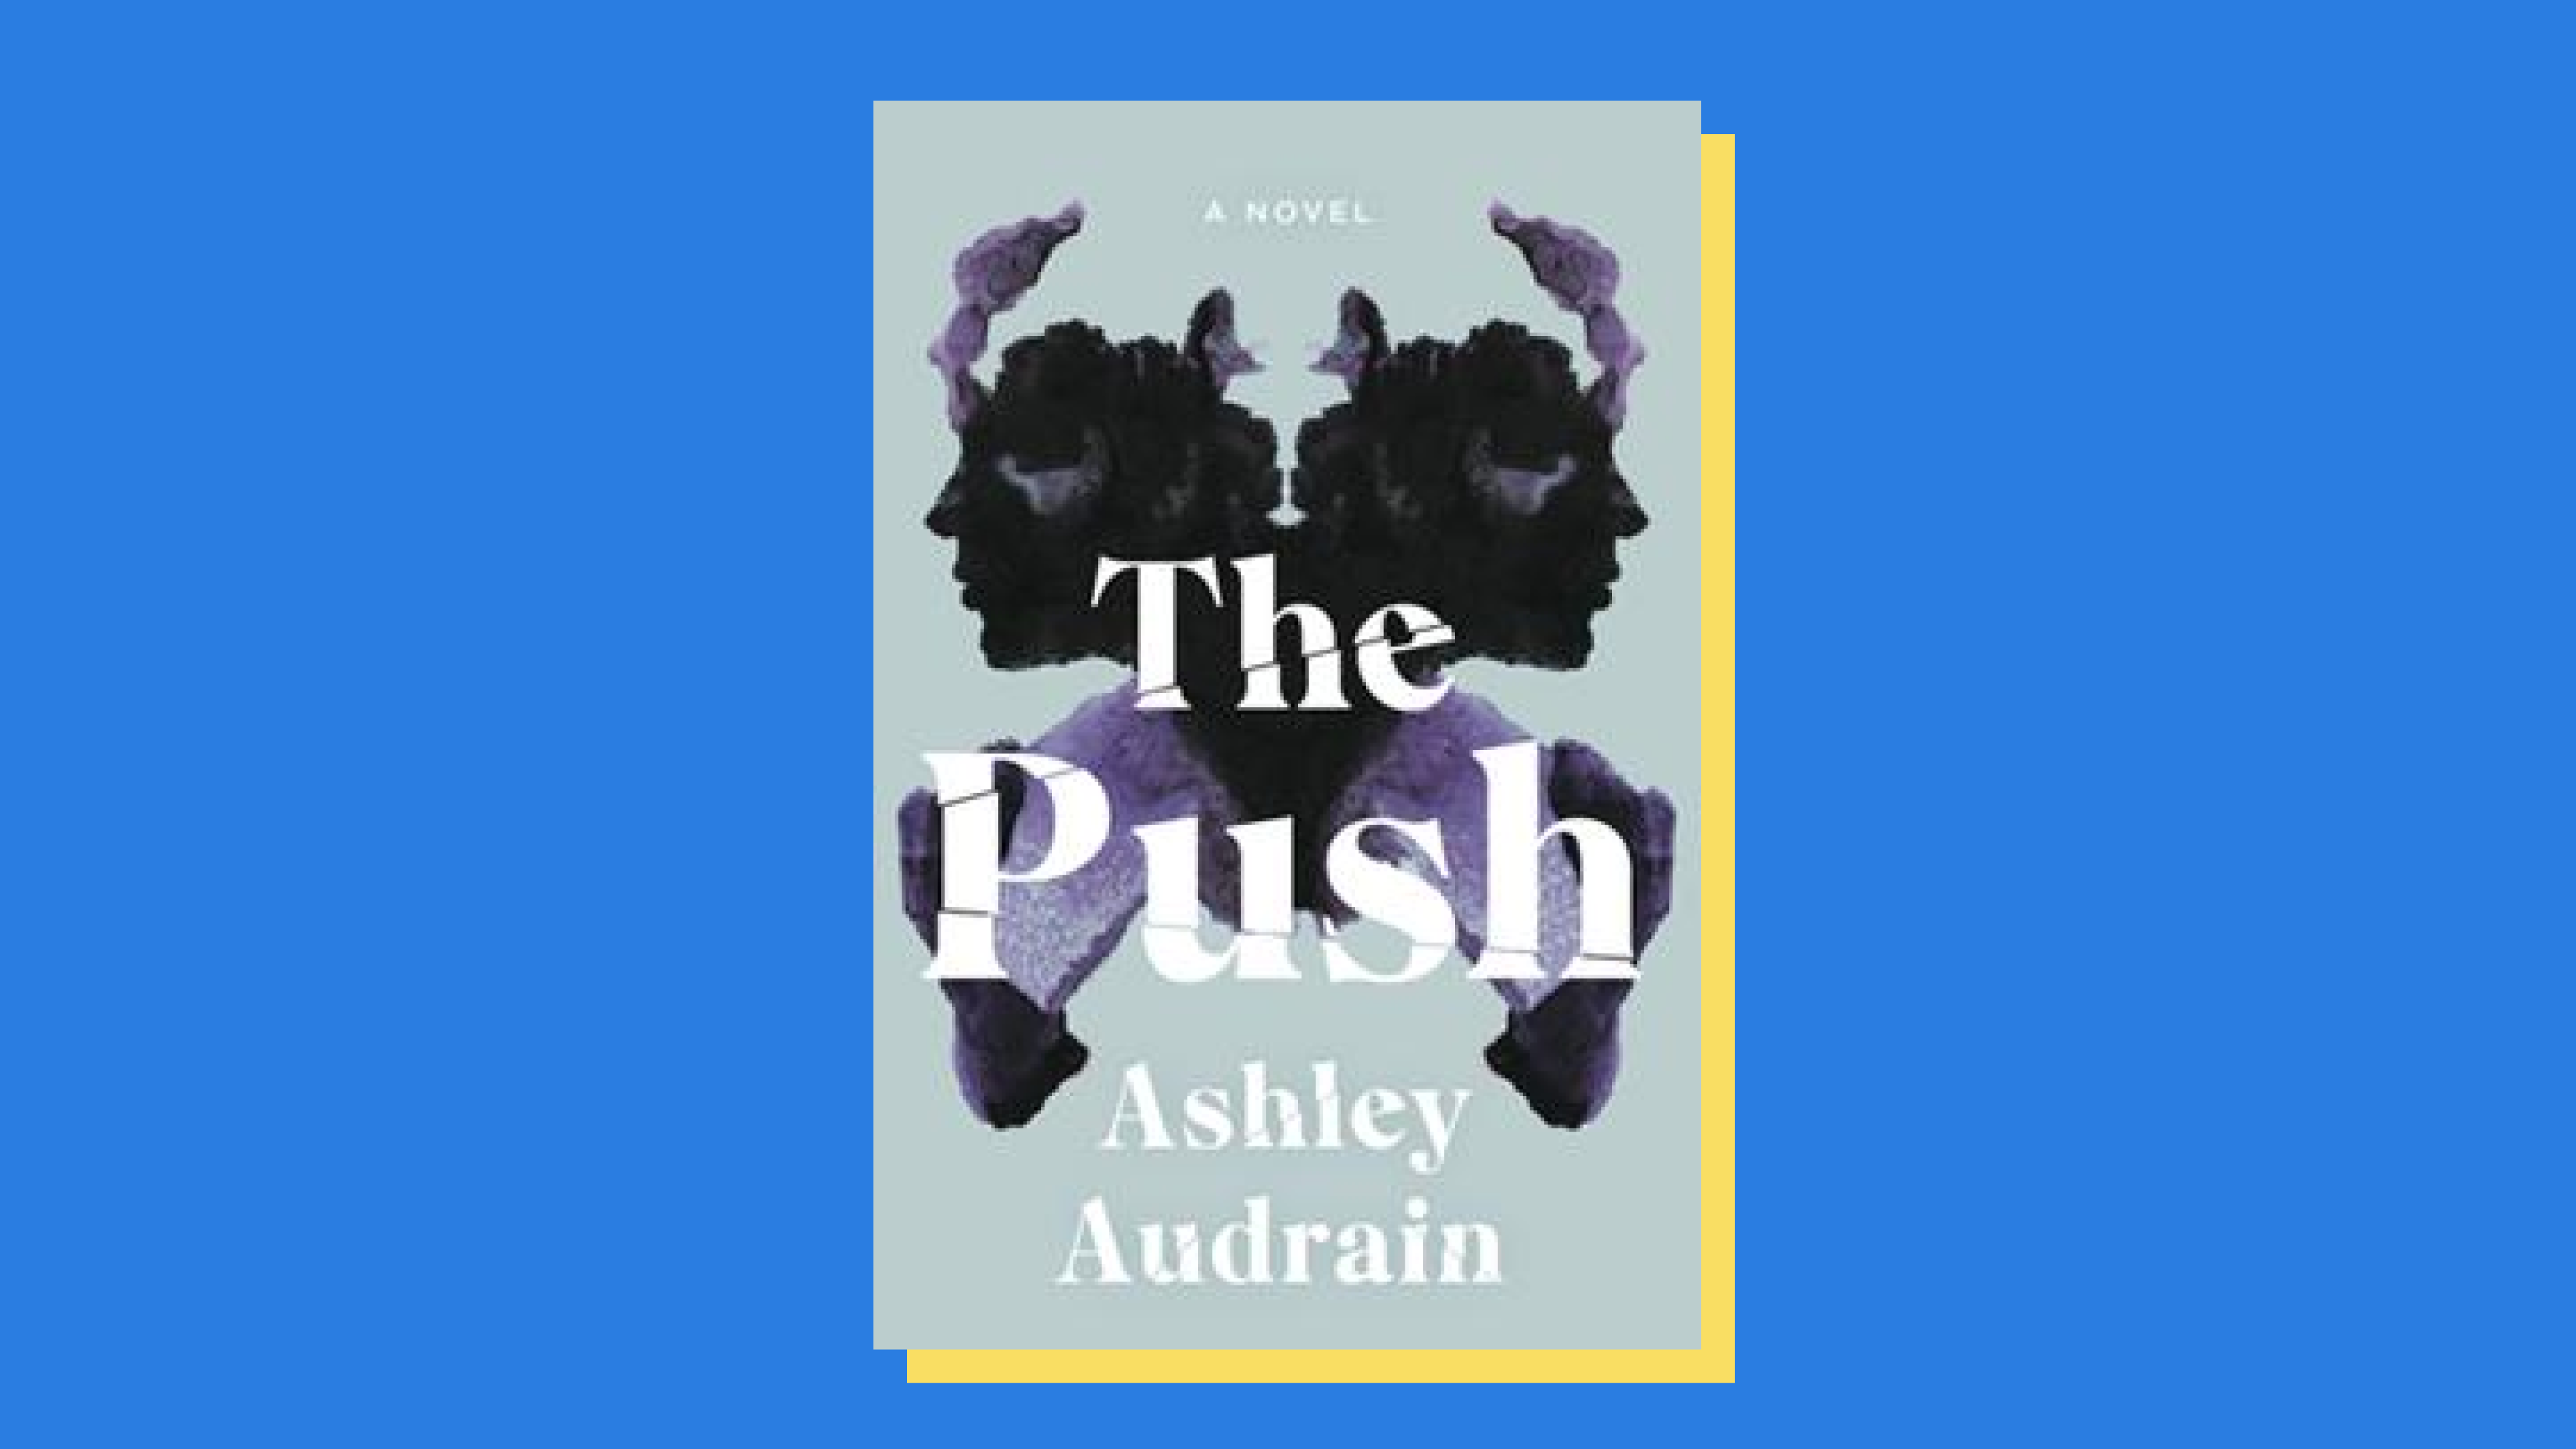 “The Push” by Ashley Audrain